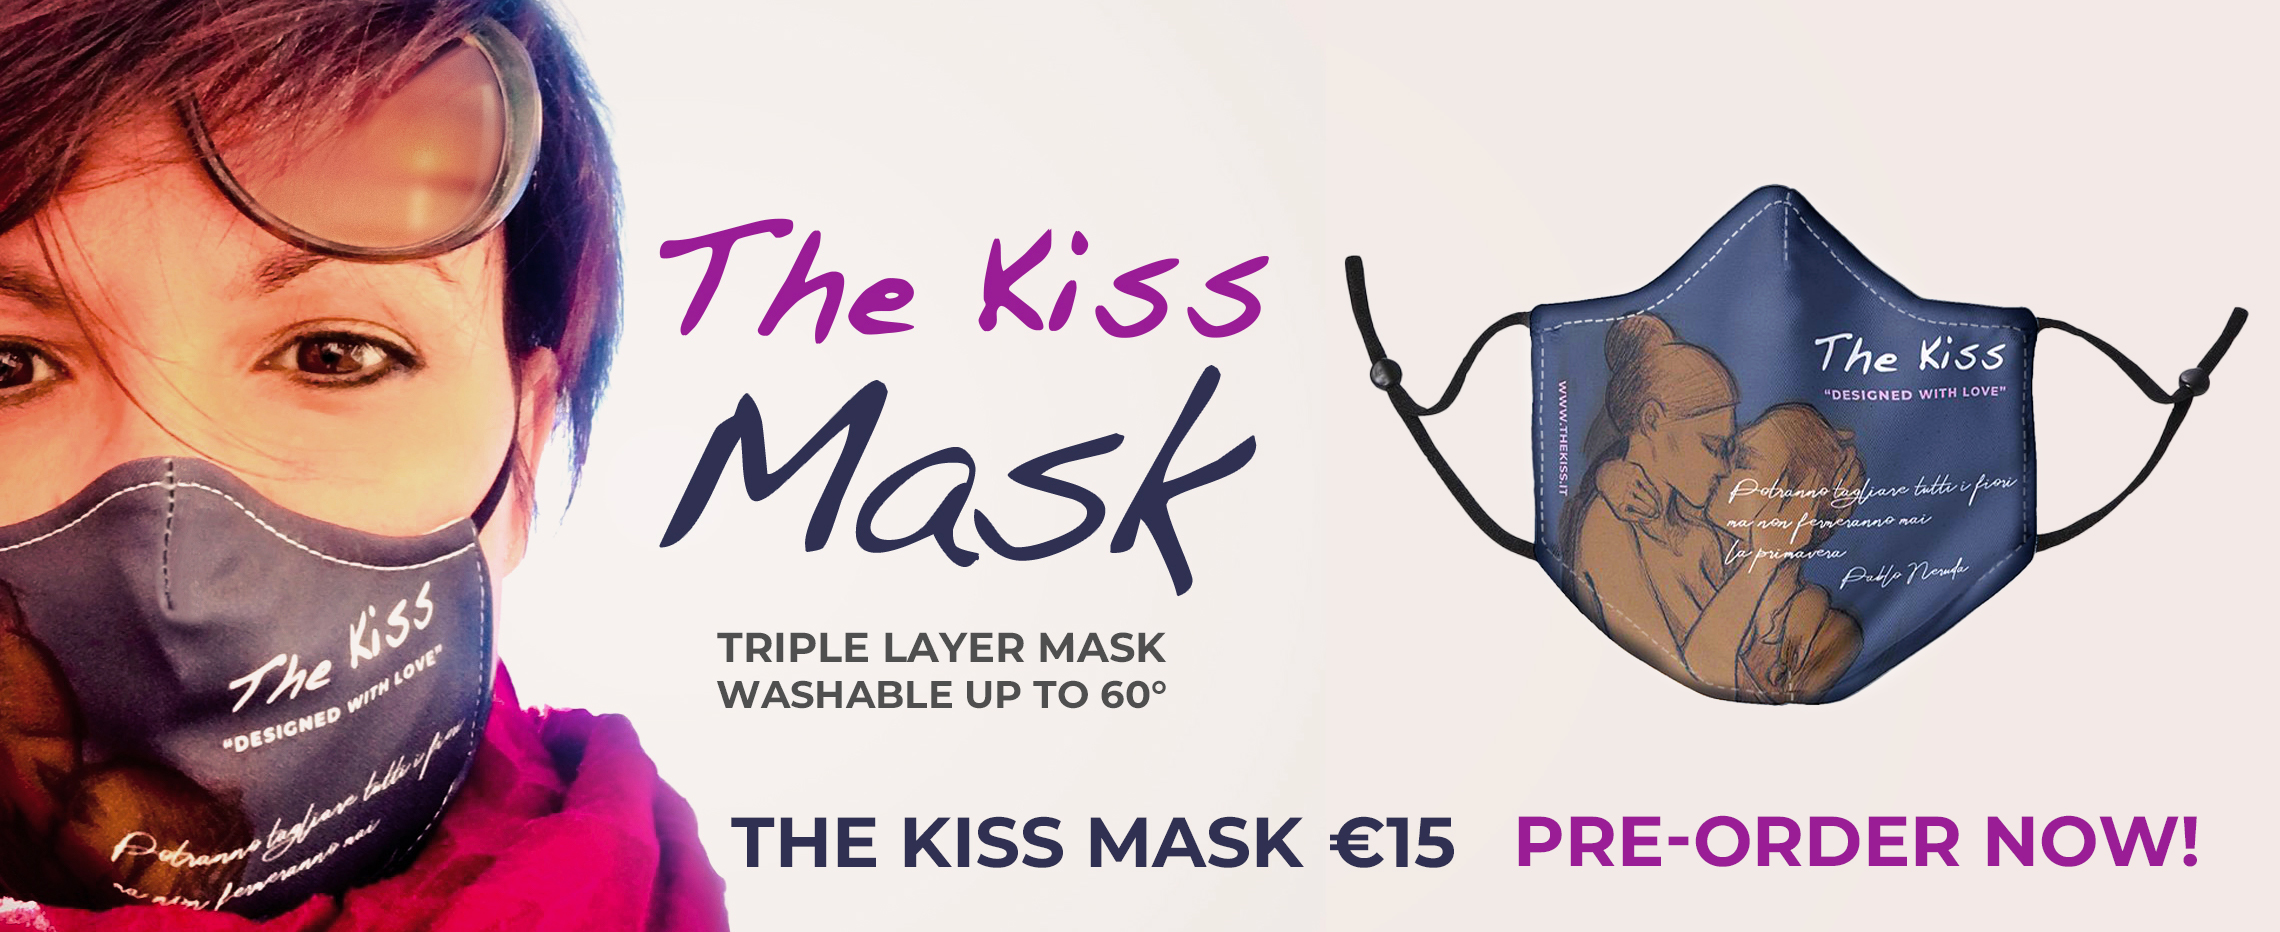 The Kiss Mask